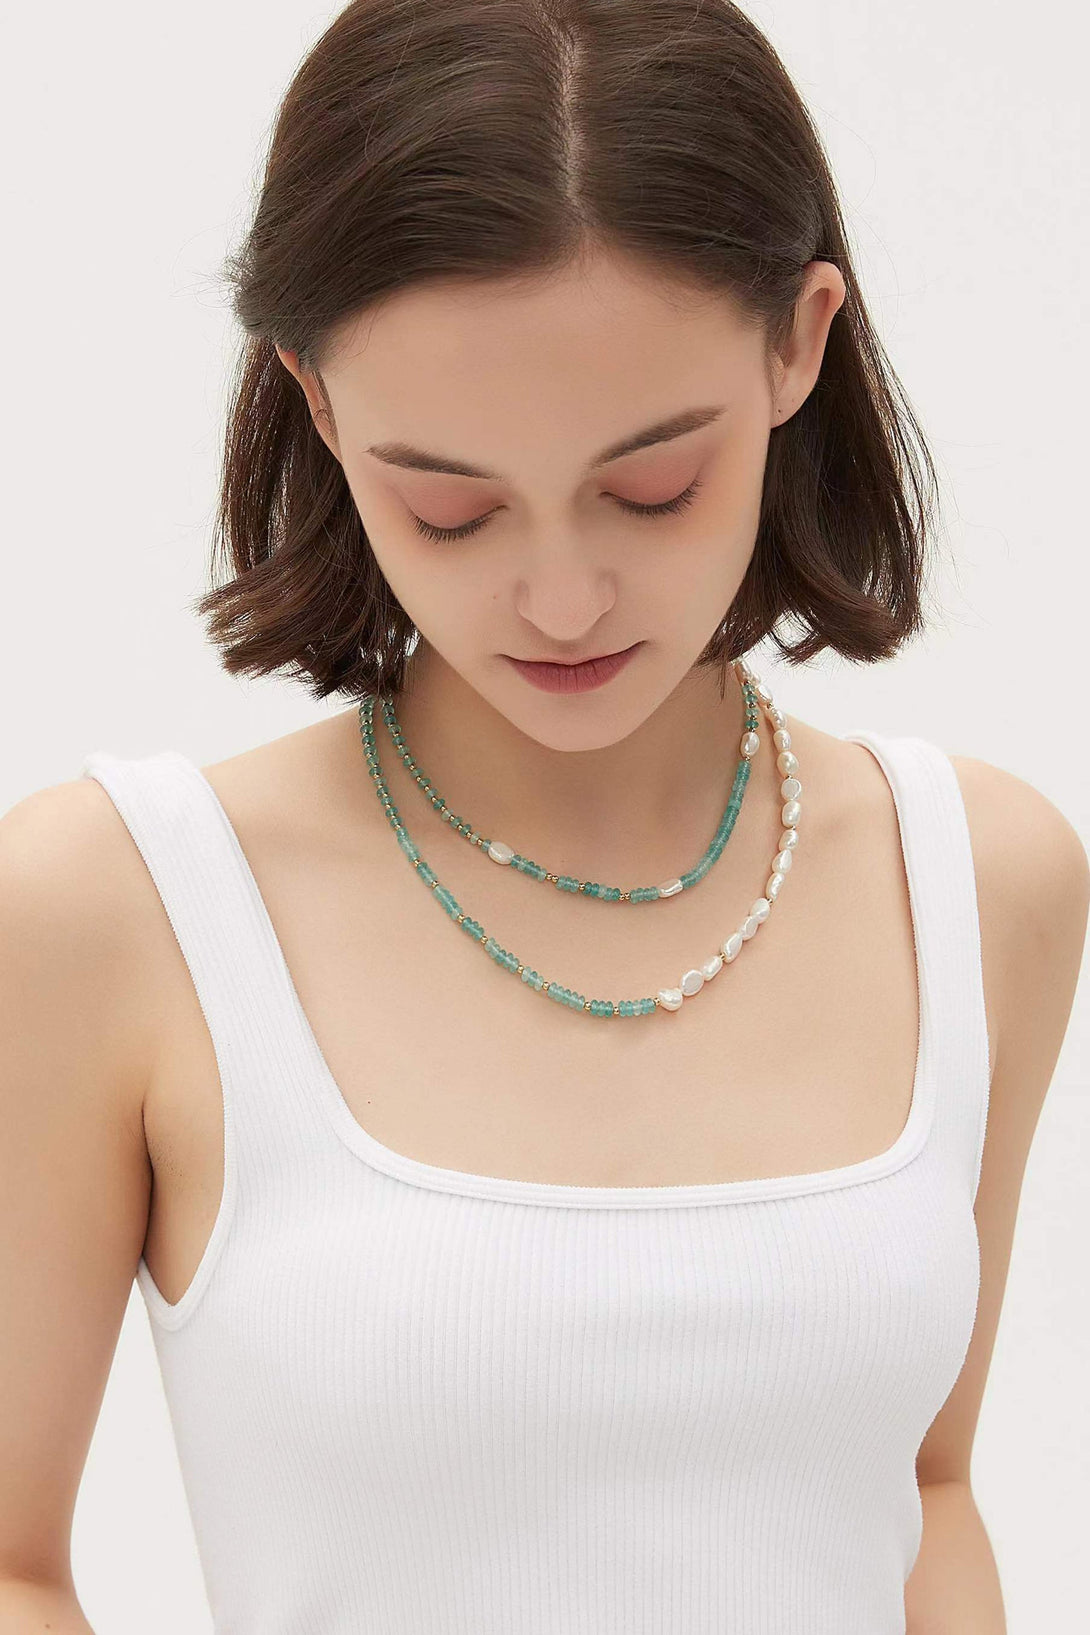 Venus Cultured Baroque Pearl and Crystal Bead Necklace - Classicharms